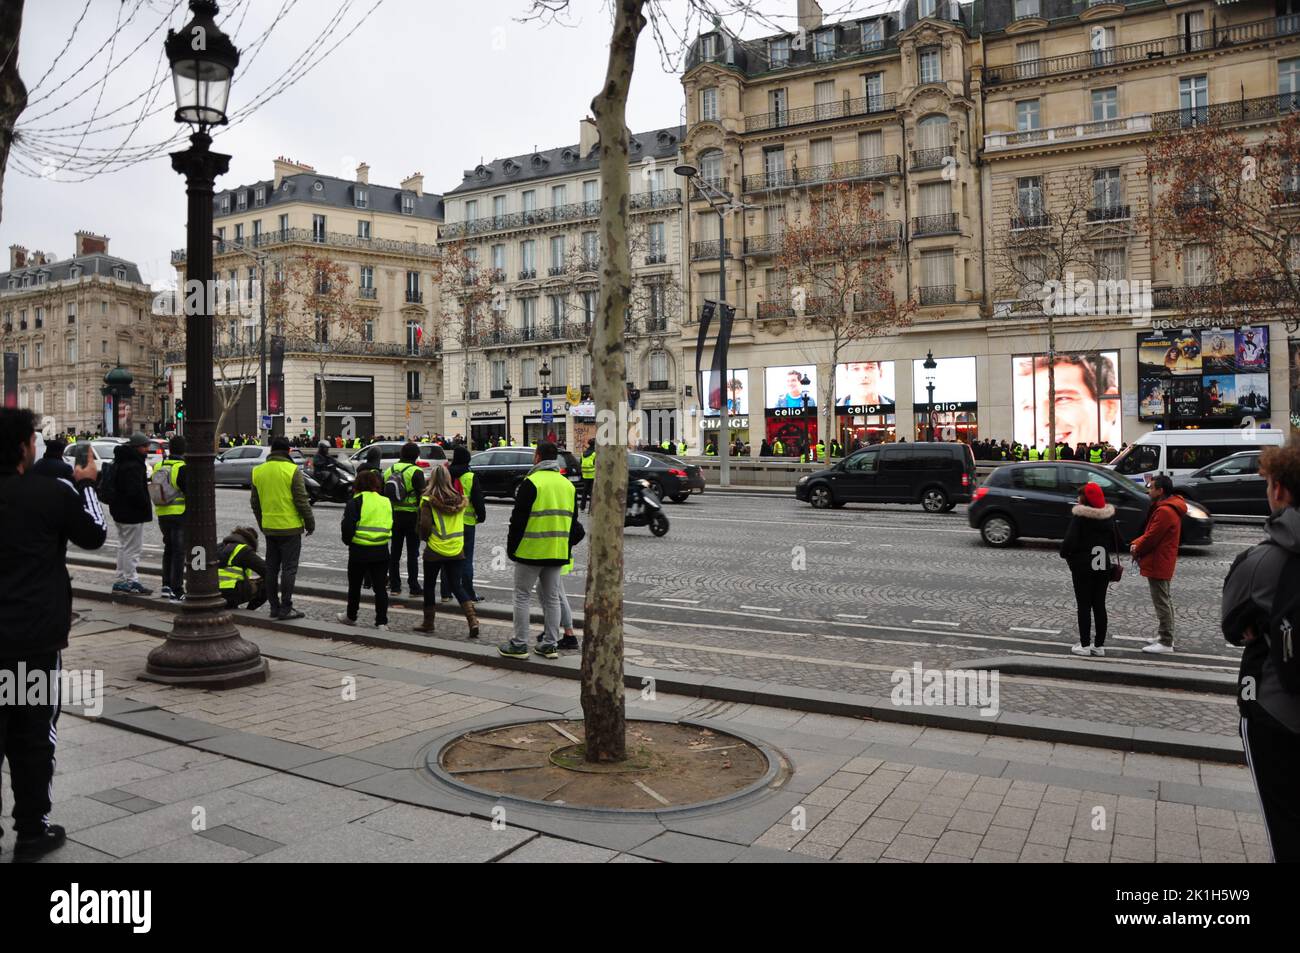 The Yellow Vests protesters on the Avenue des Champs-Elysees in Paris, France. Stock Photo